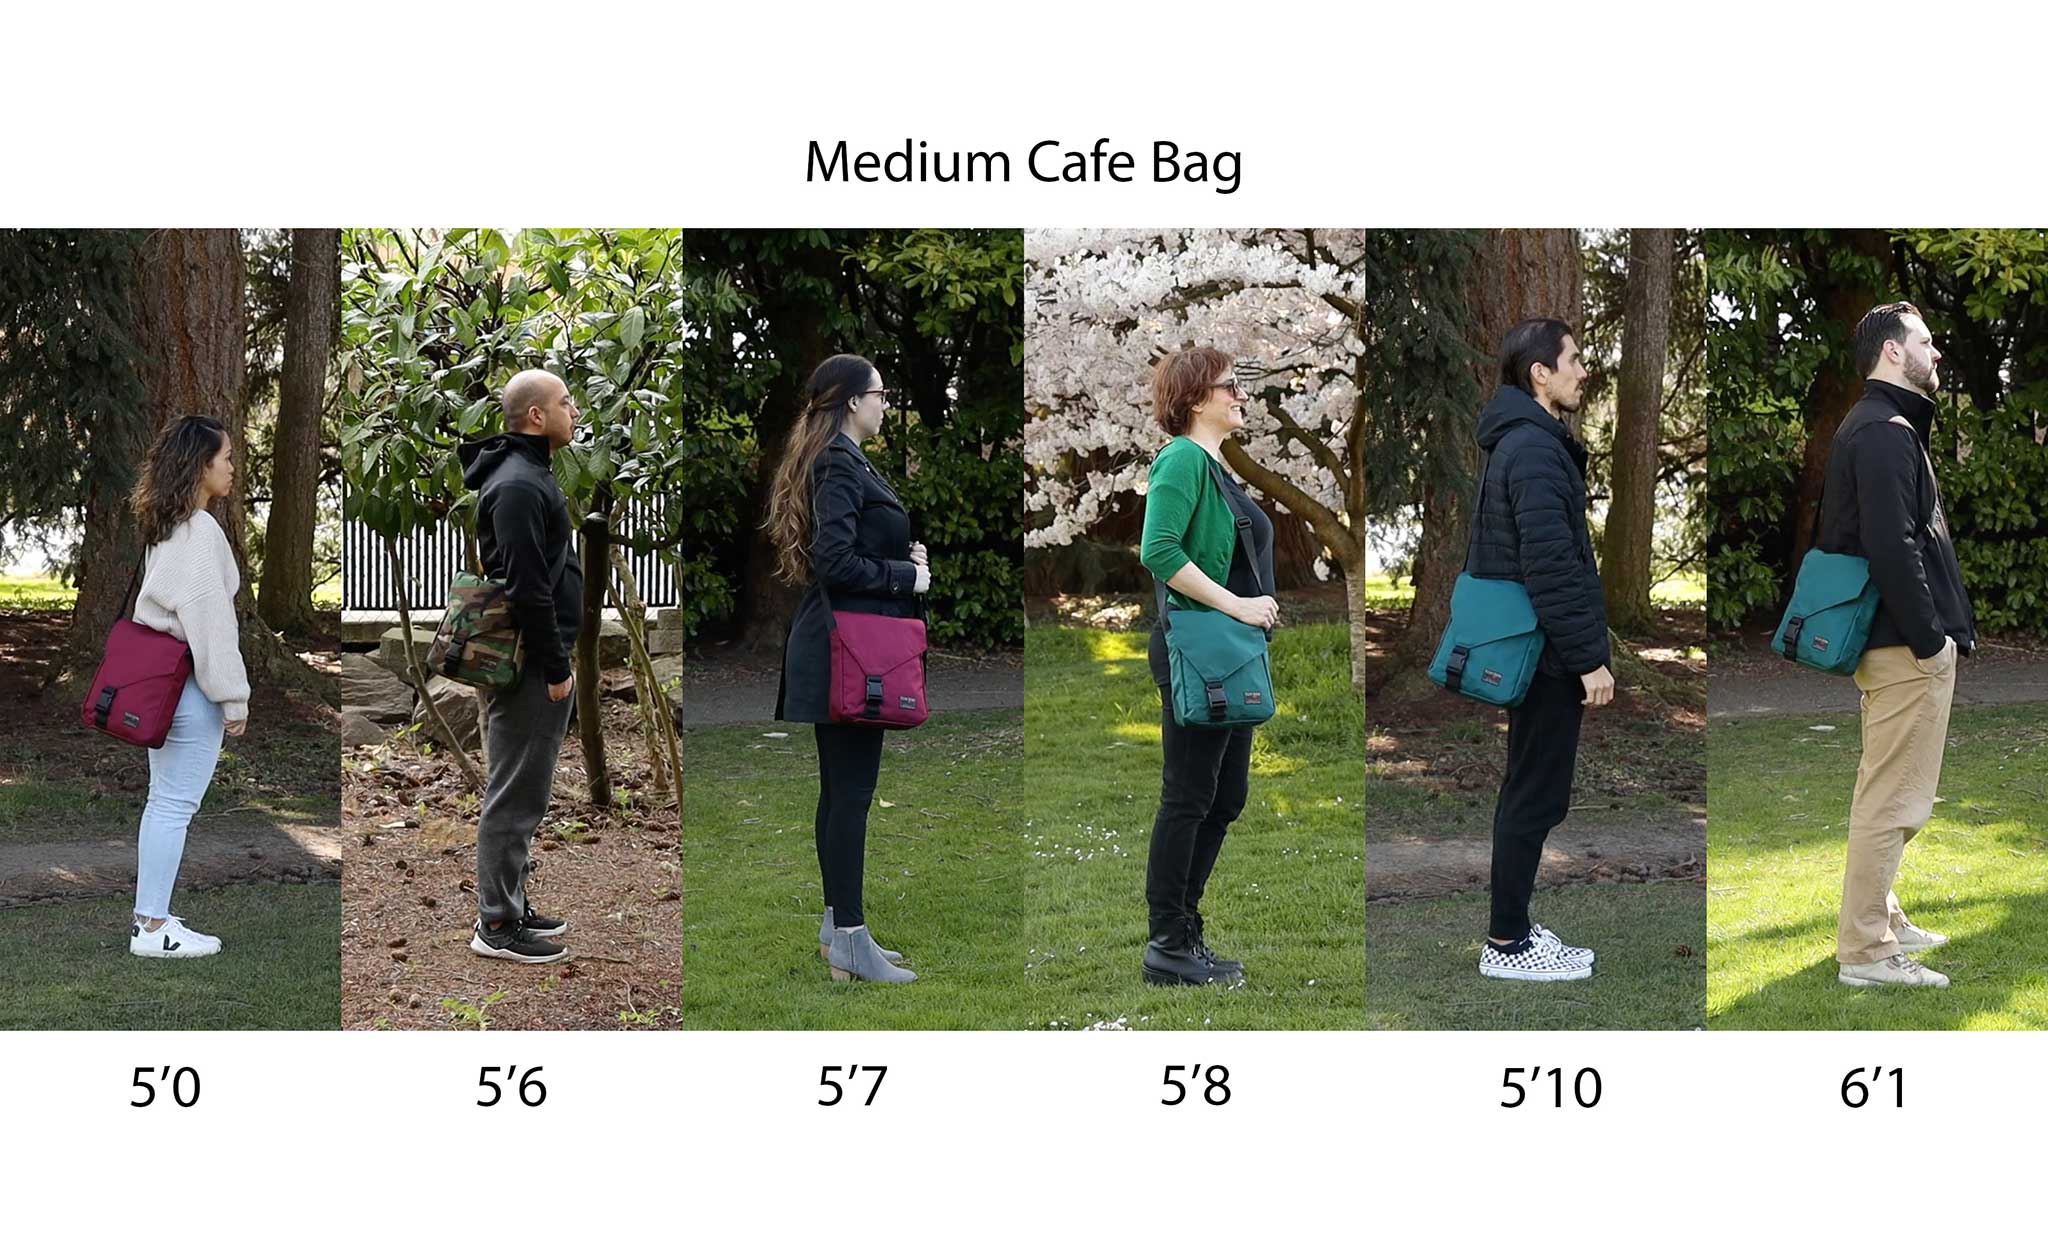 Medium Cafe Bag worn side-by-side by people of various heights